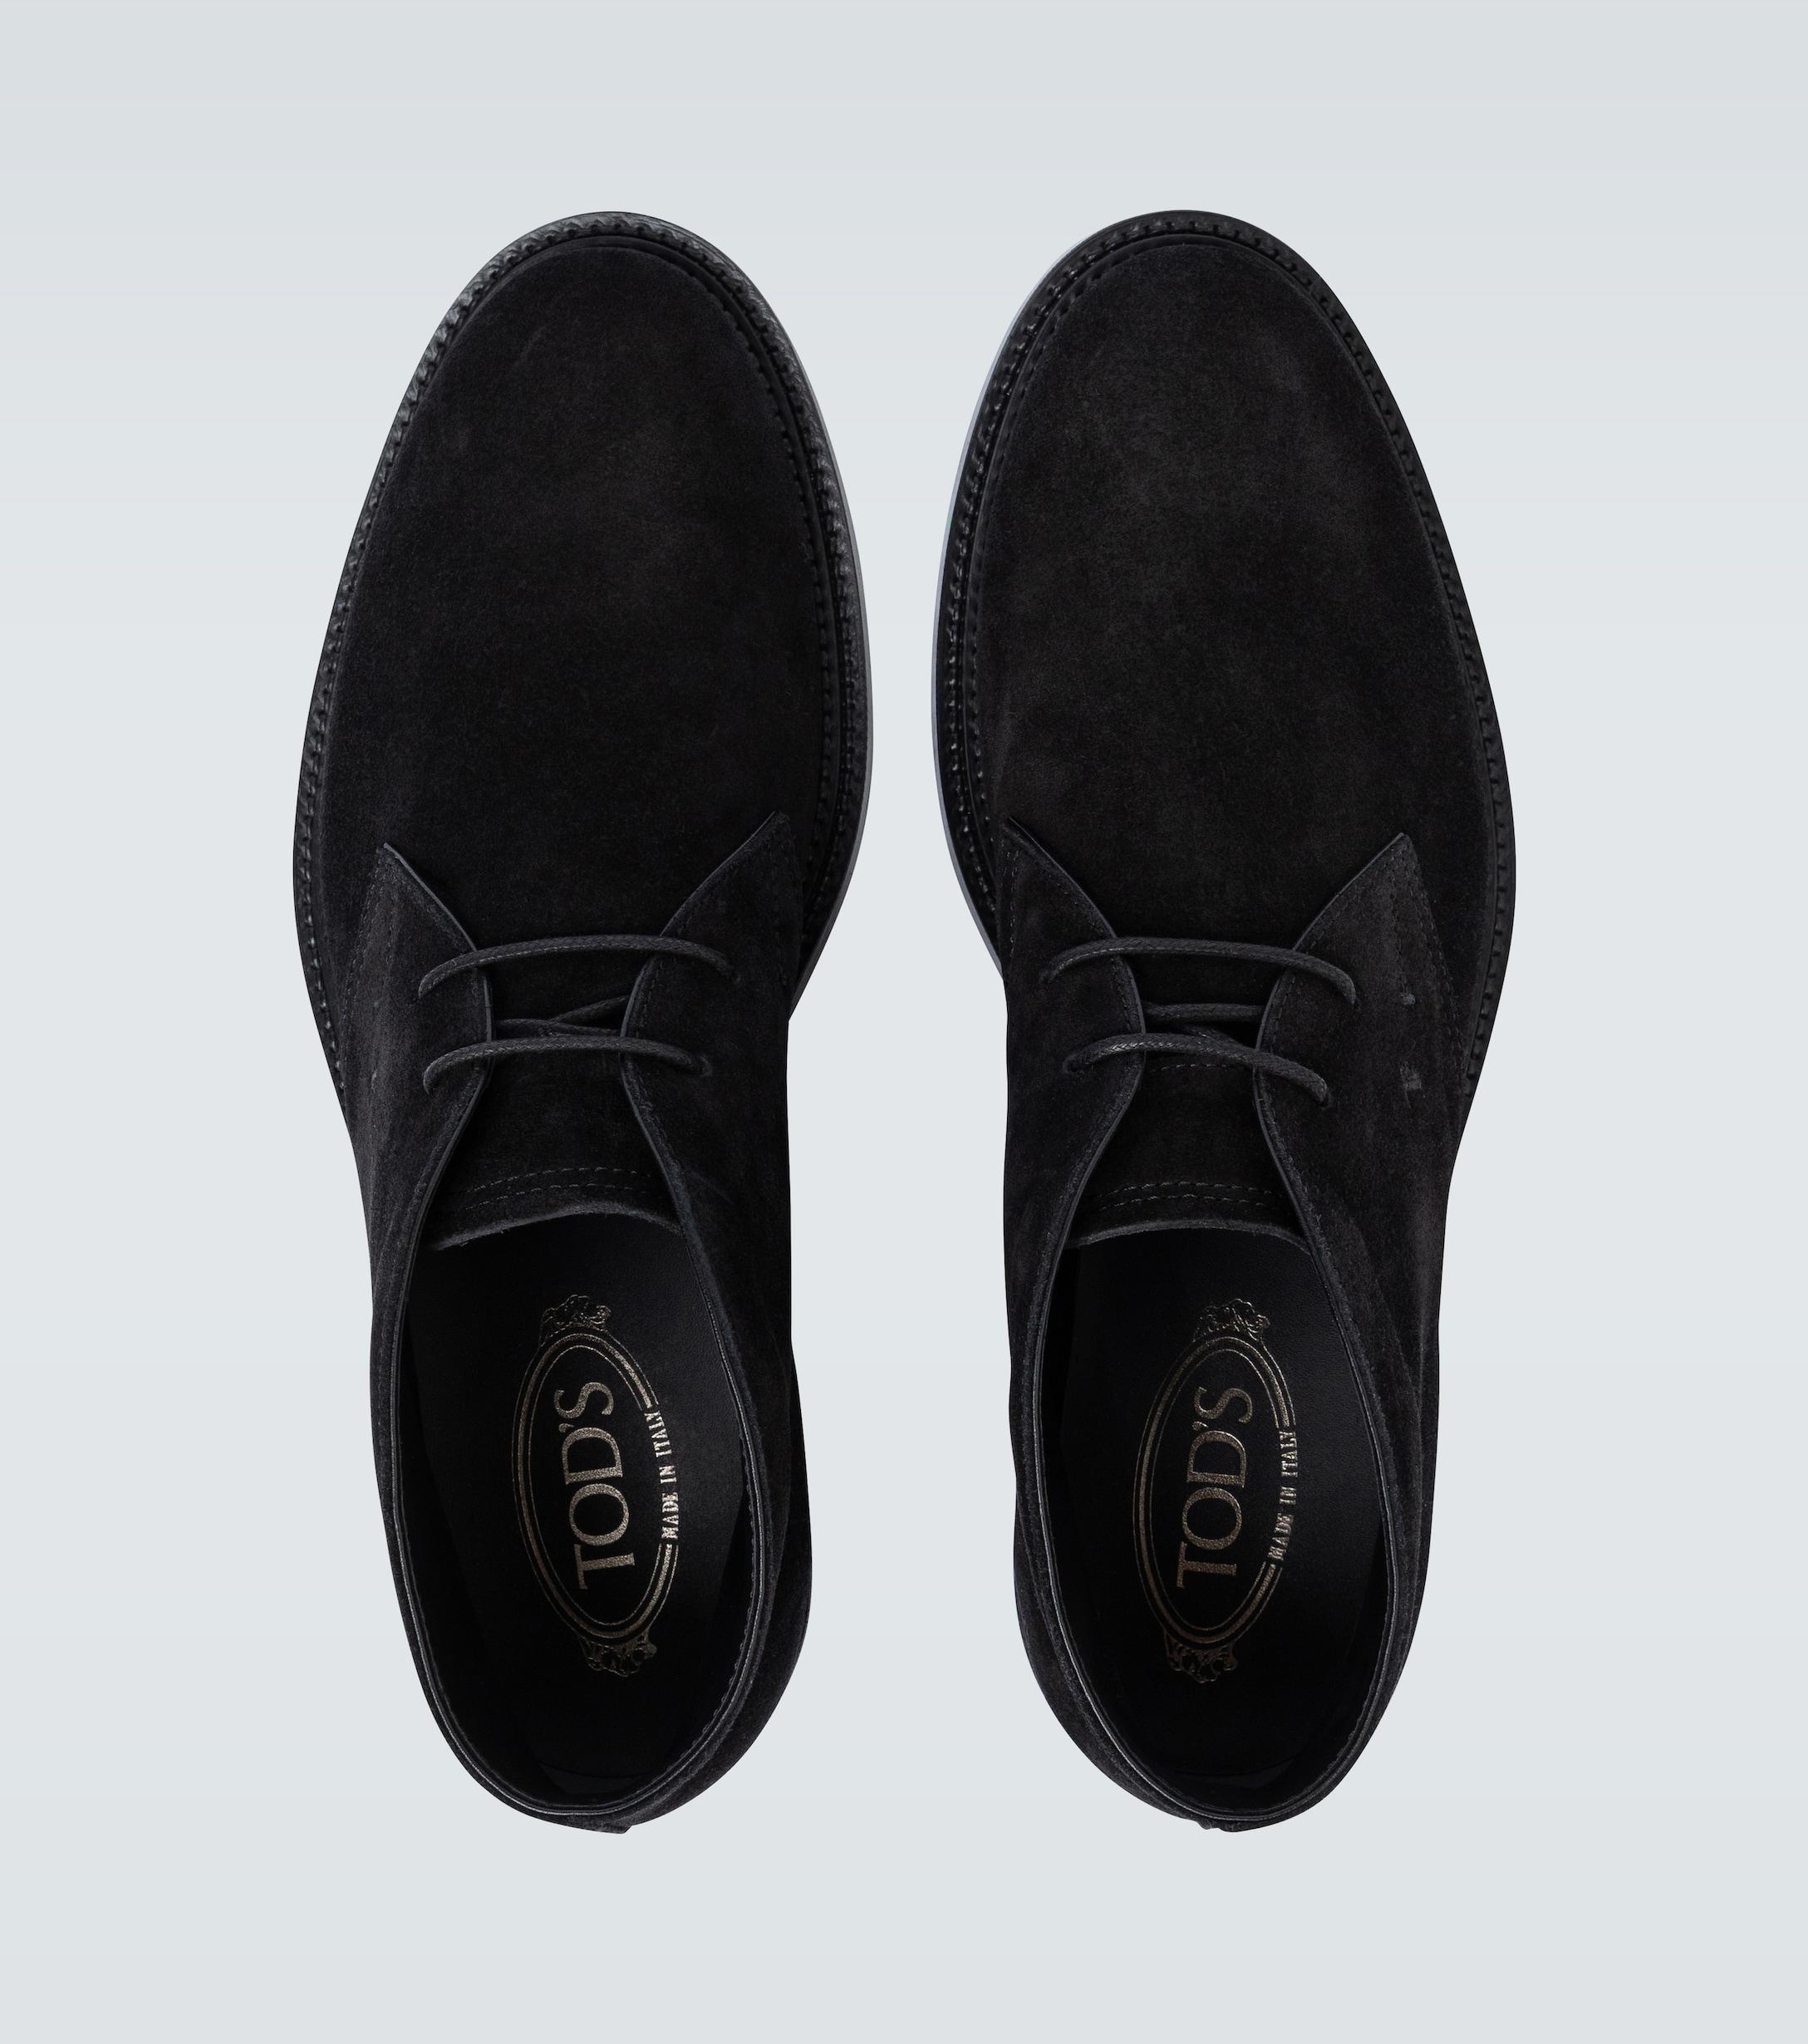 Tod's Suede Desert Boots in Black for Men - Lyst